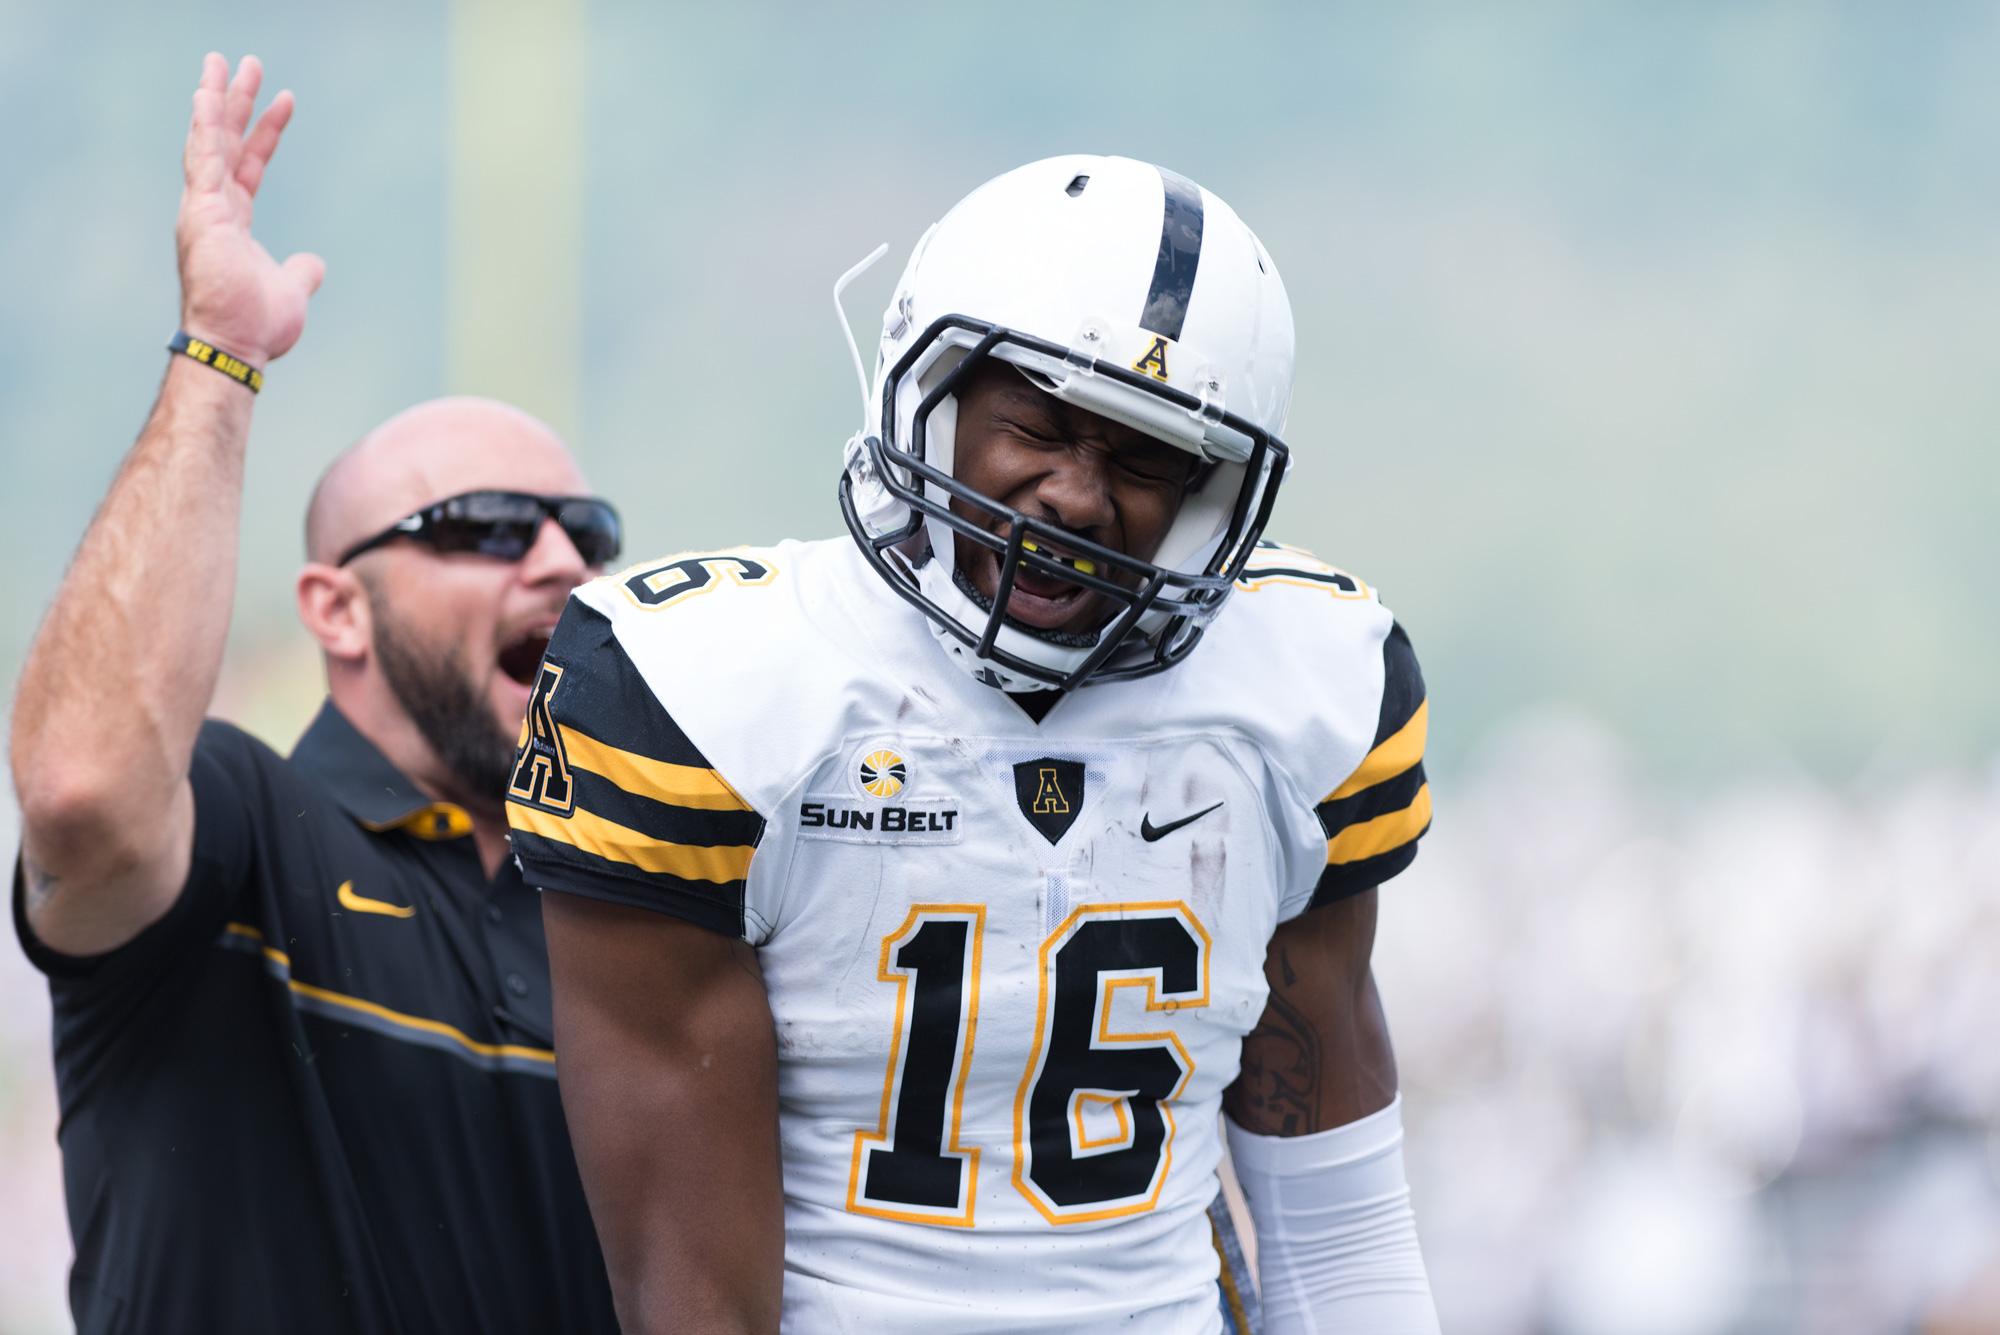 Wide receiver Jaquil Capel finished with a career-high 82 receiving yards tonight against Old Dominion. App State won 31-7.